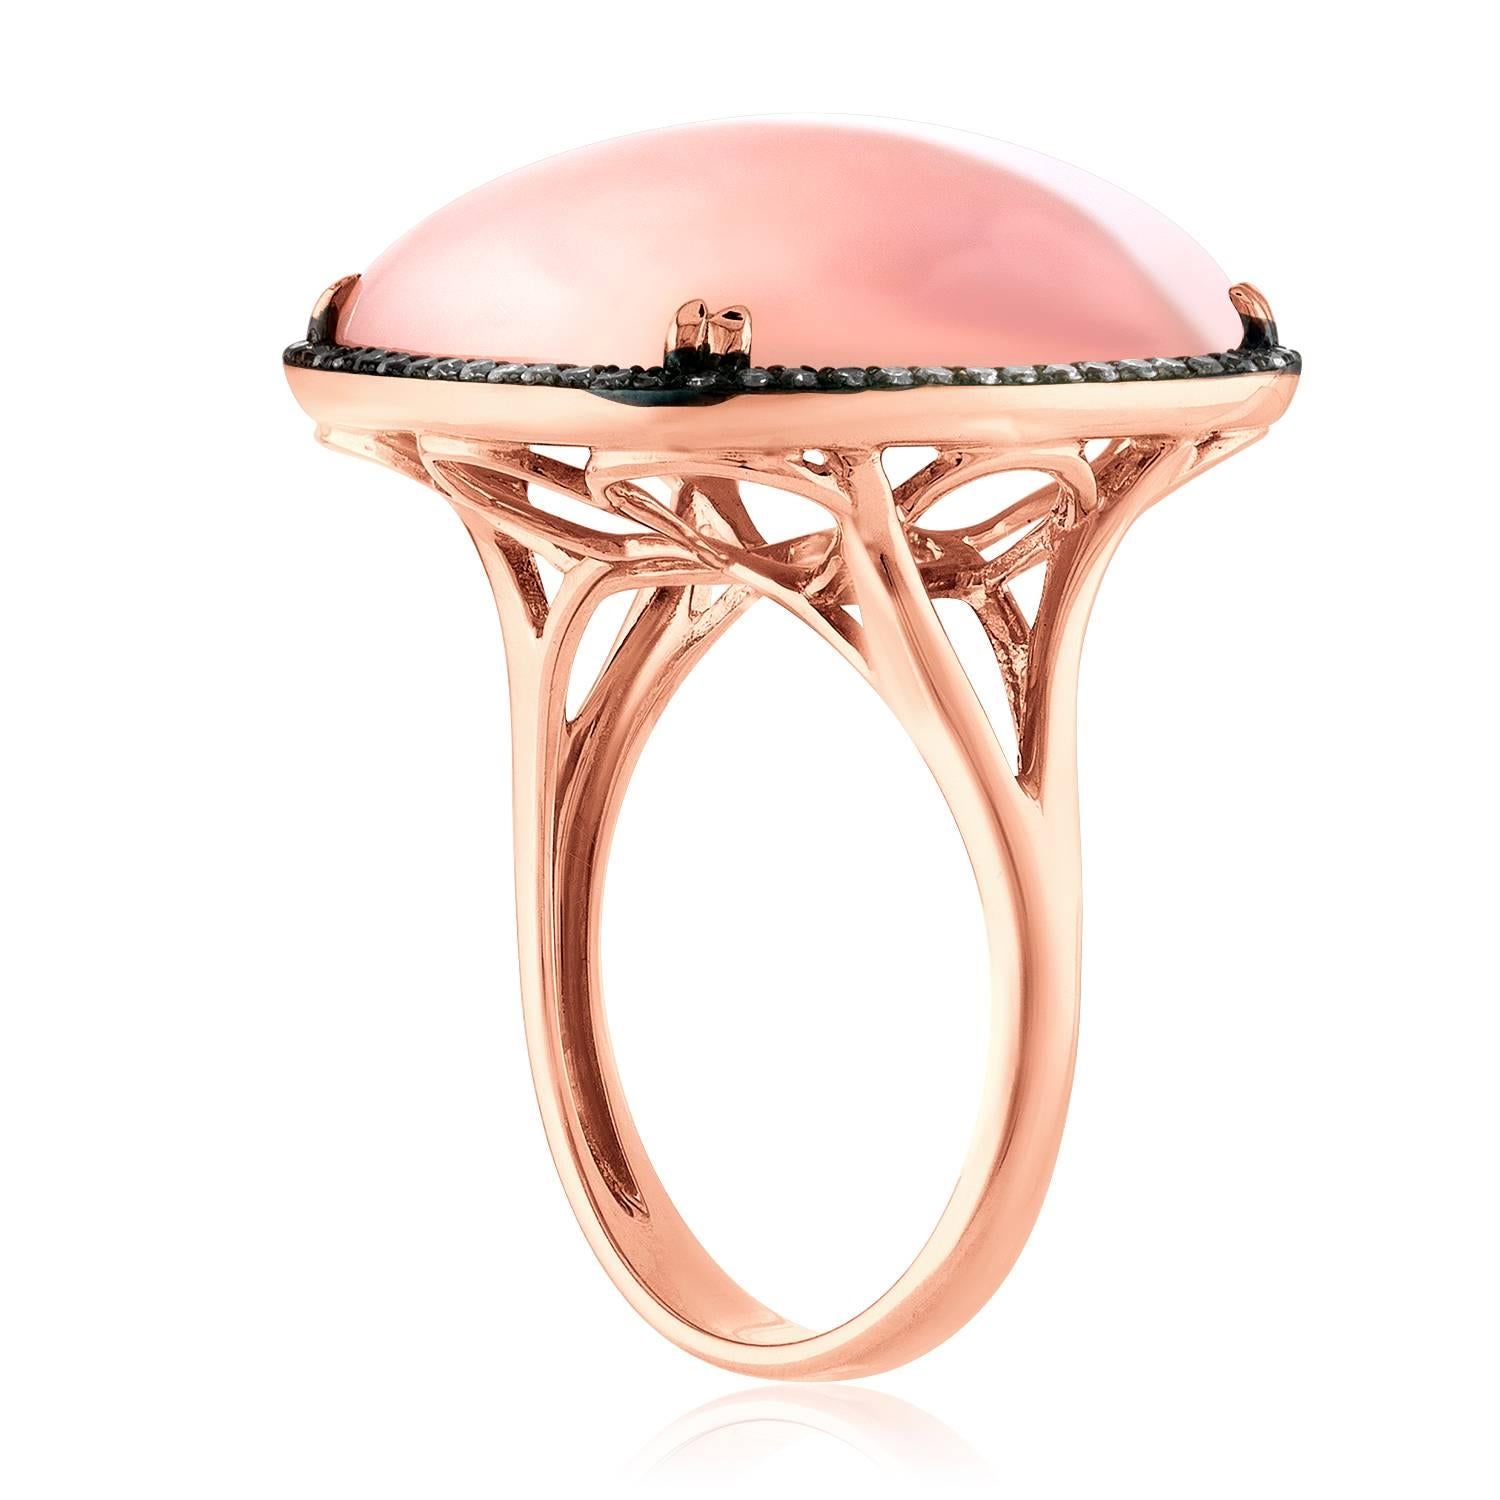 Delicate Statement Ring
The ring is 14K Rose Gold
The ring has a Square Pink Opal 17.0 Carats
There are 0.27 Carats in Brown Diamonds
The ring measures 0.75